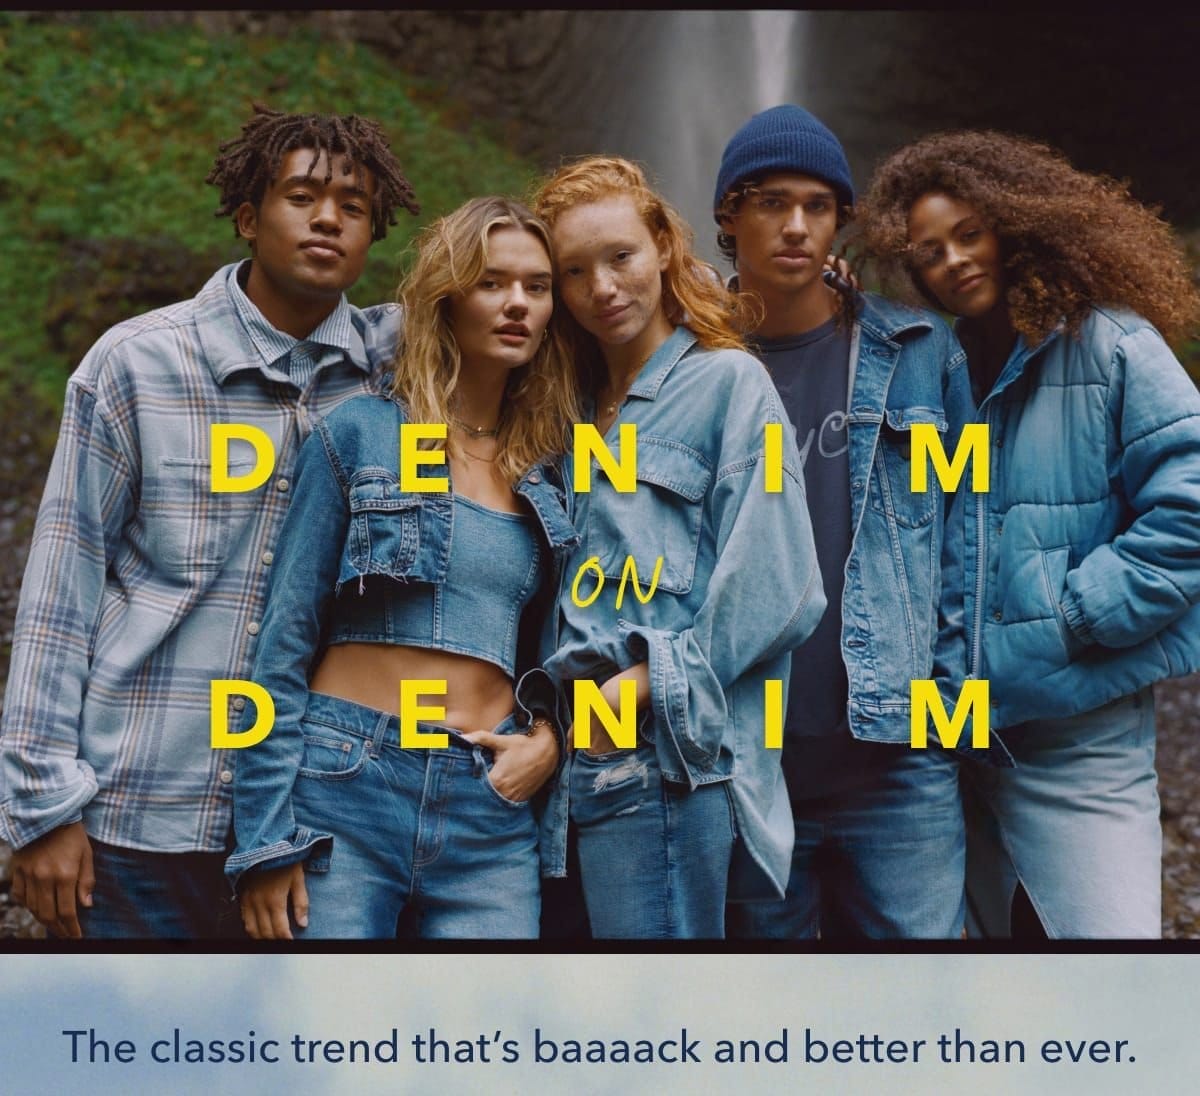 Denim on Denim |The classic trend that's baaack and better than ever.